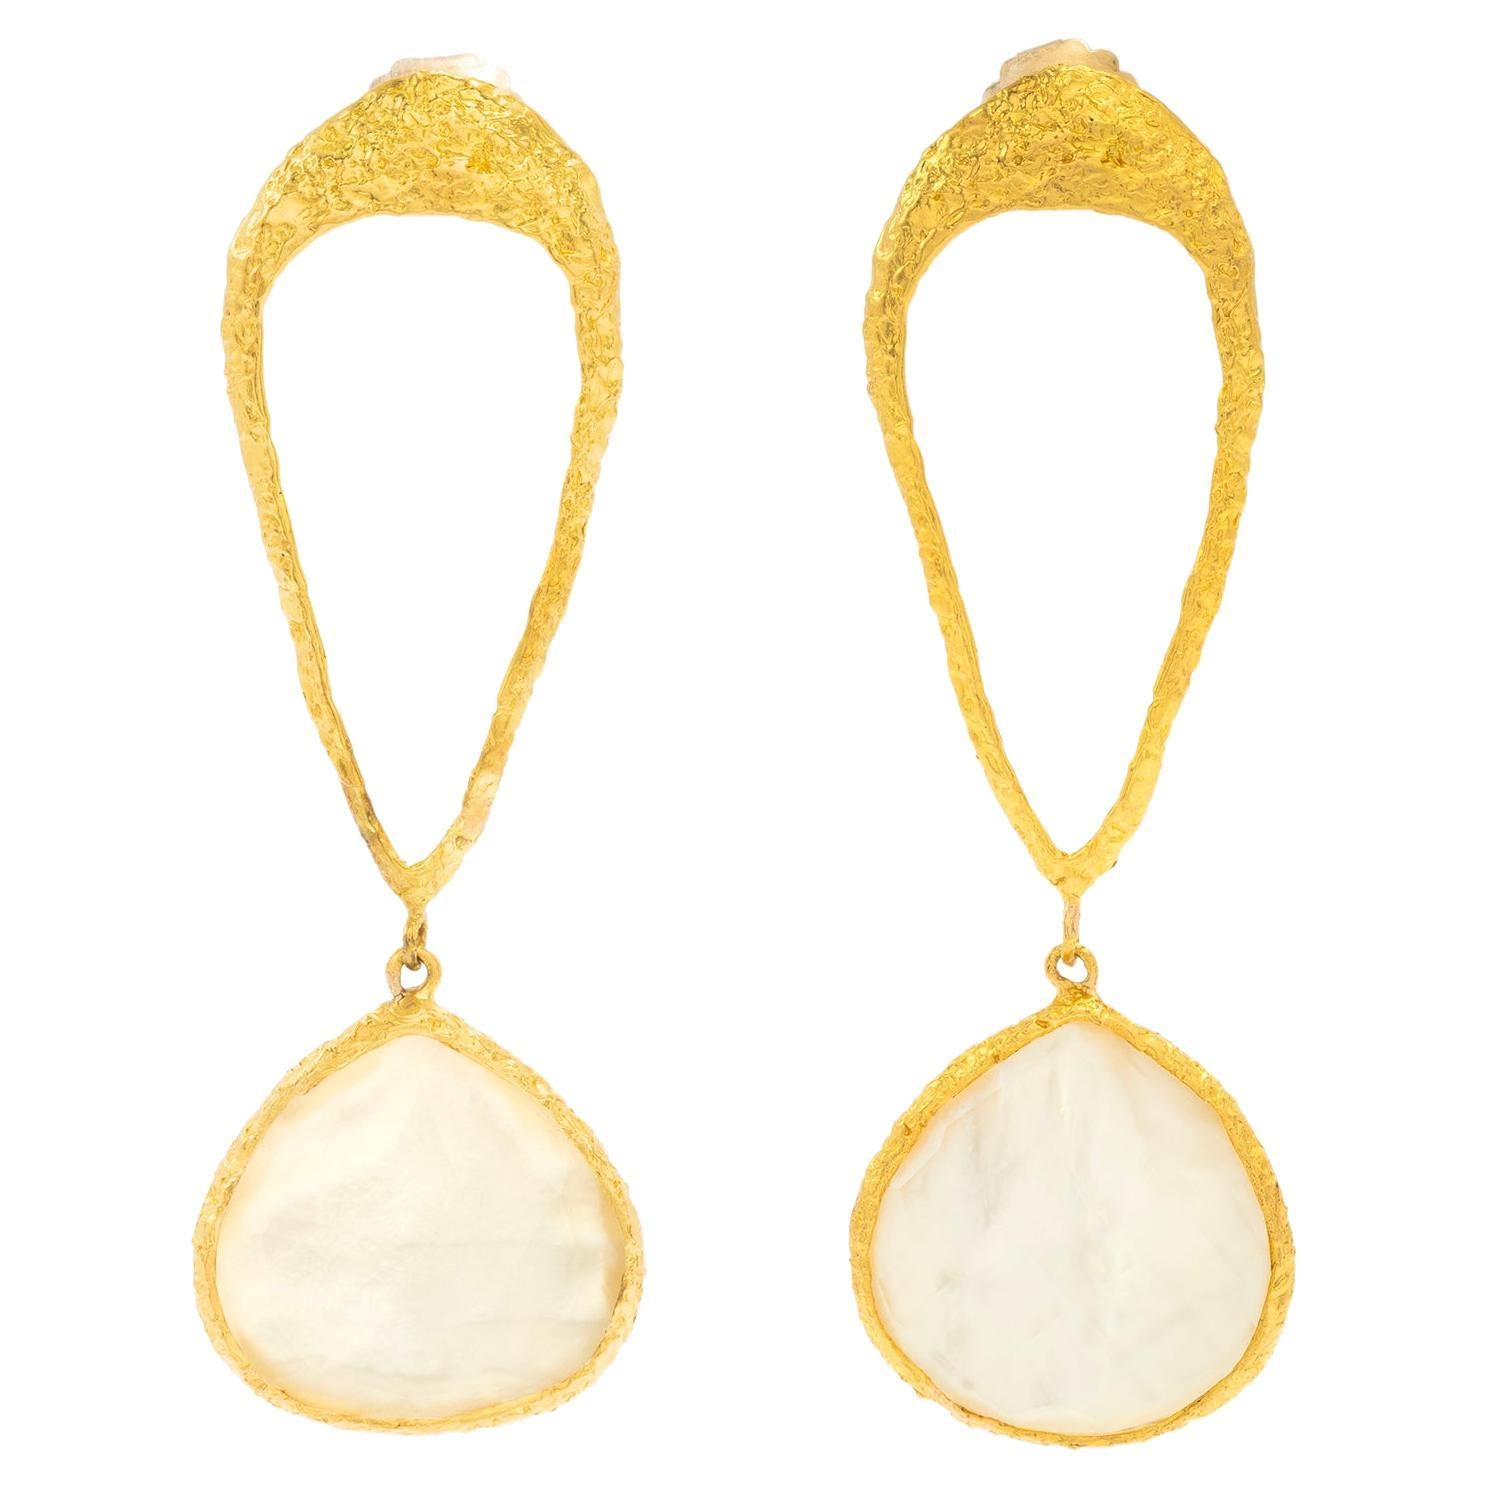 Soleil 22k Gold Pearl and Crystal Signature Teardrop Earrings, by Tagili For Sale